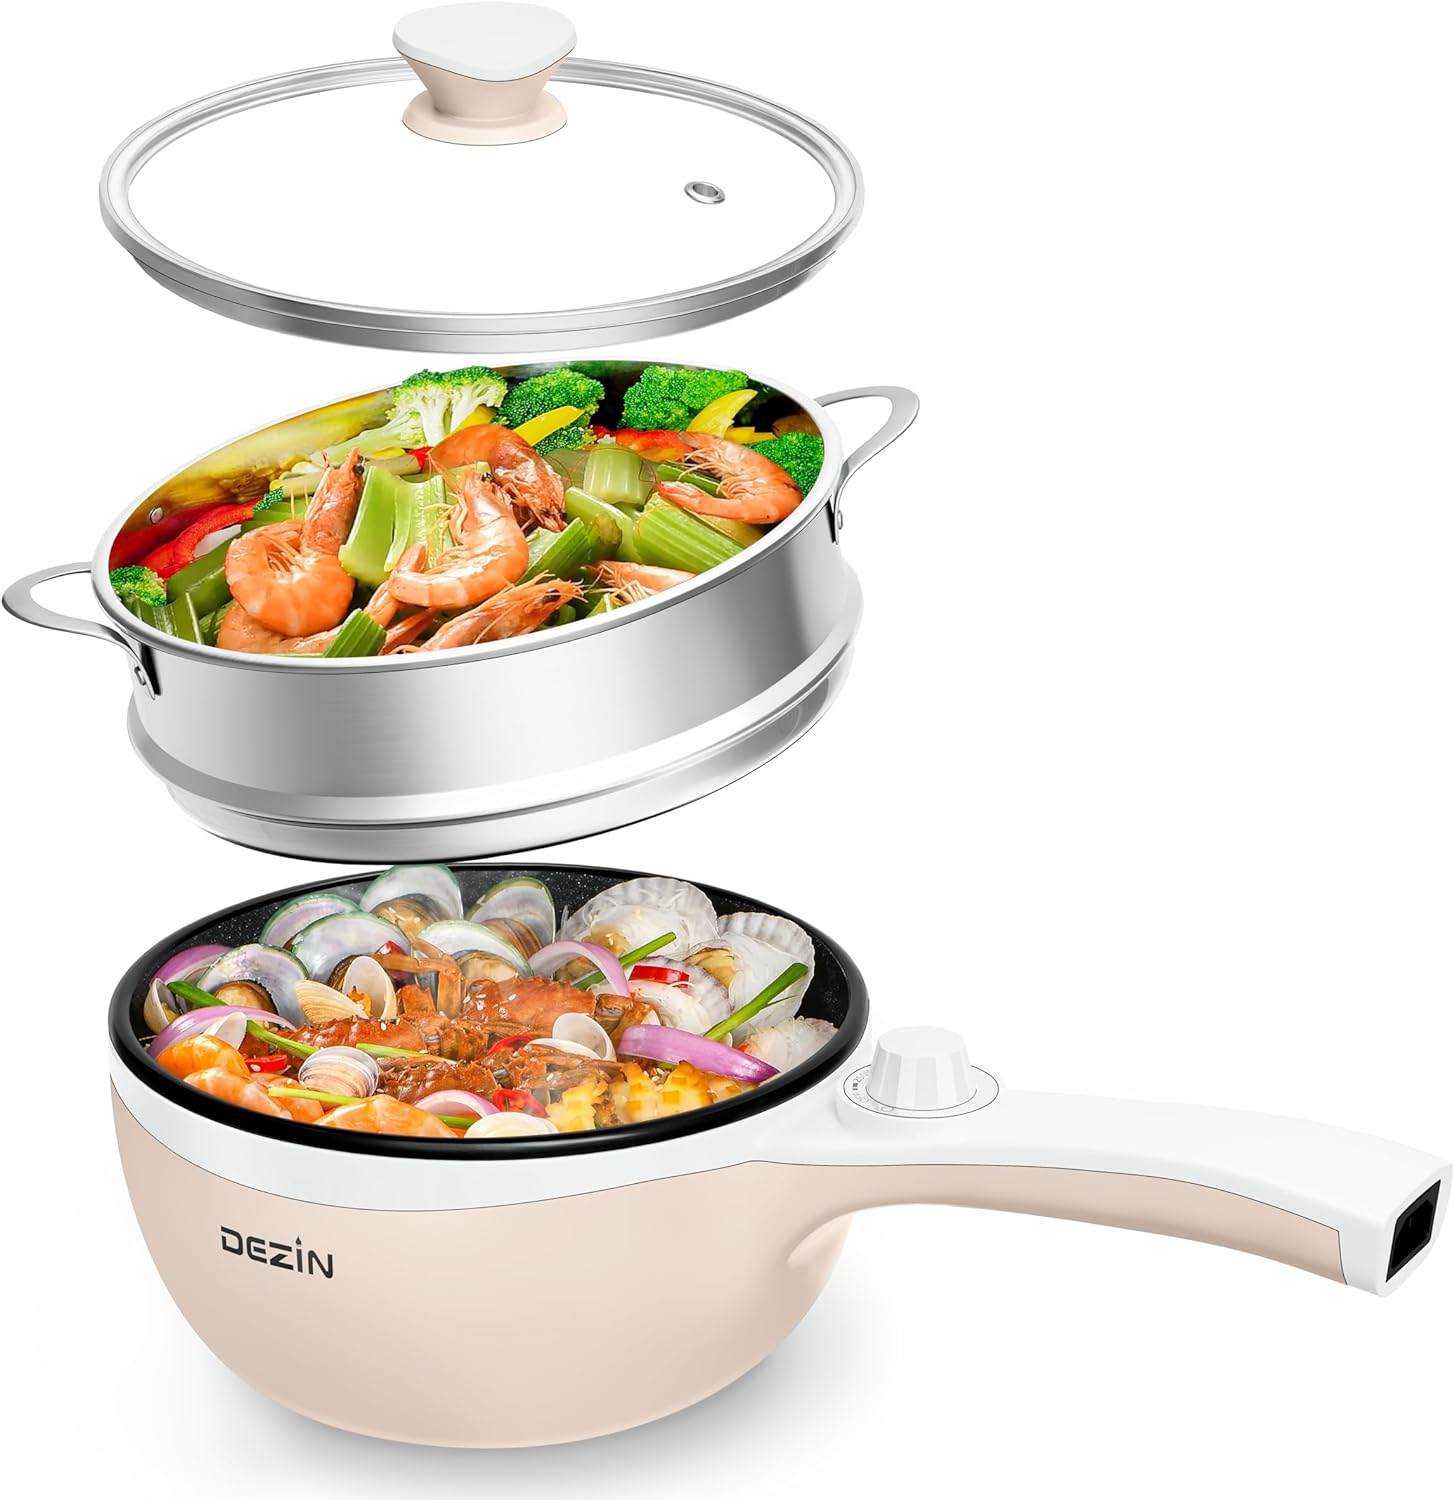 Read more about the article Dezin Hot Pot Electric with Steamer Upgraded, Non-Stick Sauté Pan, 1.5L with Power Adjustment (Egg Rack Included) for ONLY $34.99 (Was $43.99)